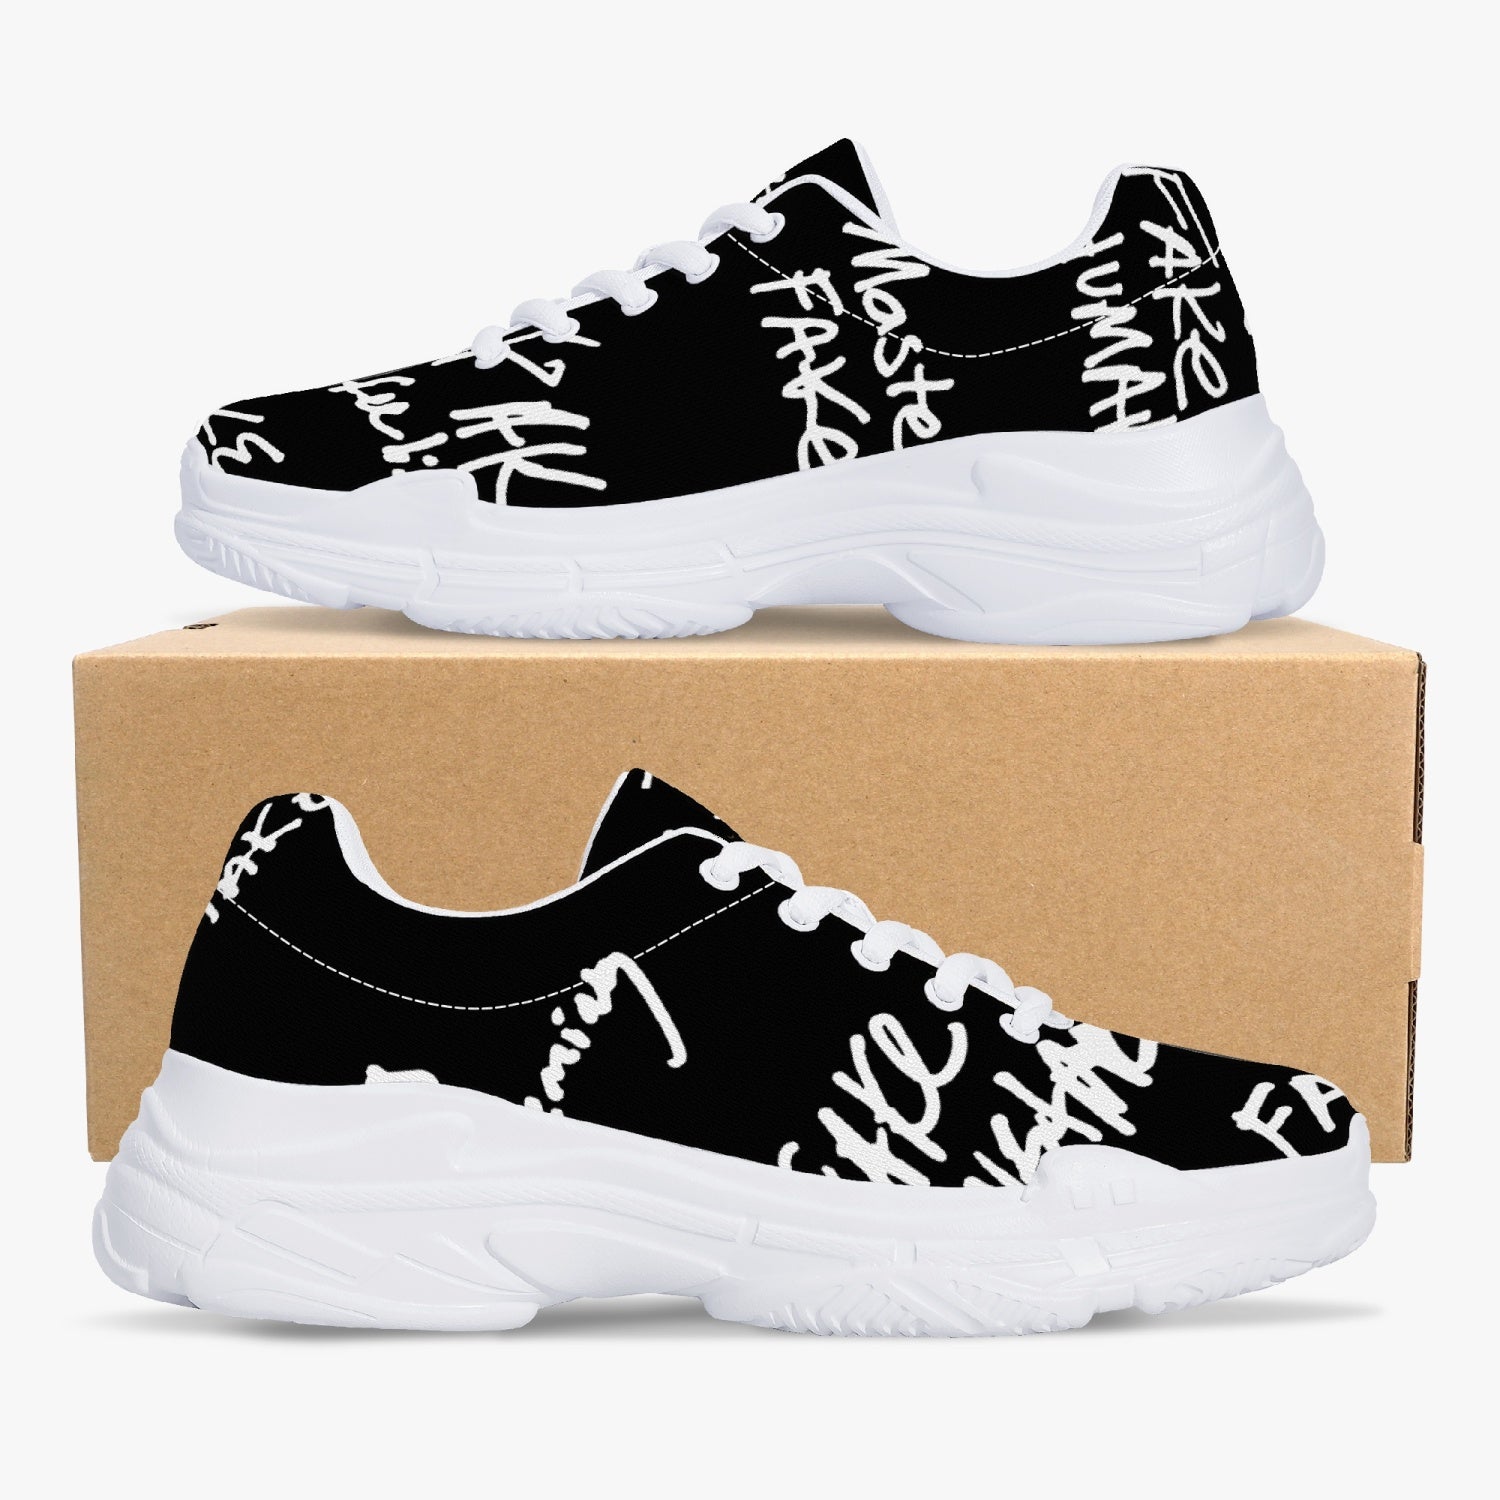 FAKEMADE Business Meeting Notation Chunky Trend Sneakers